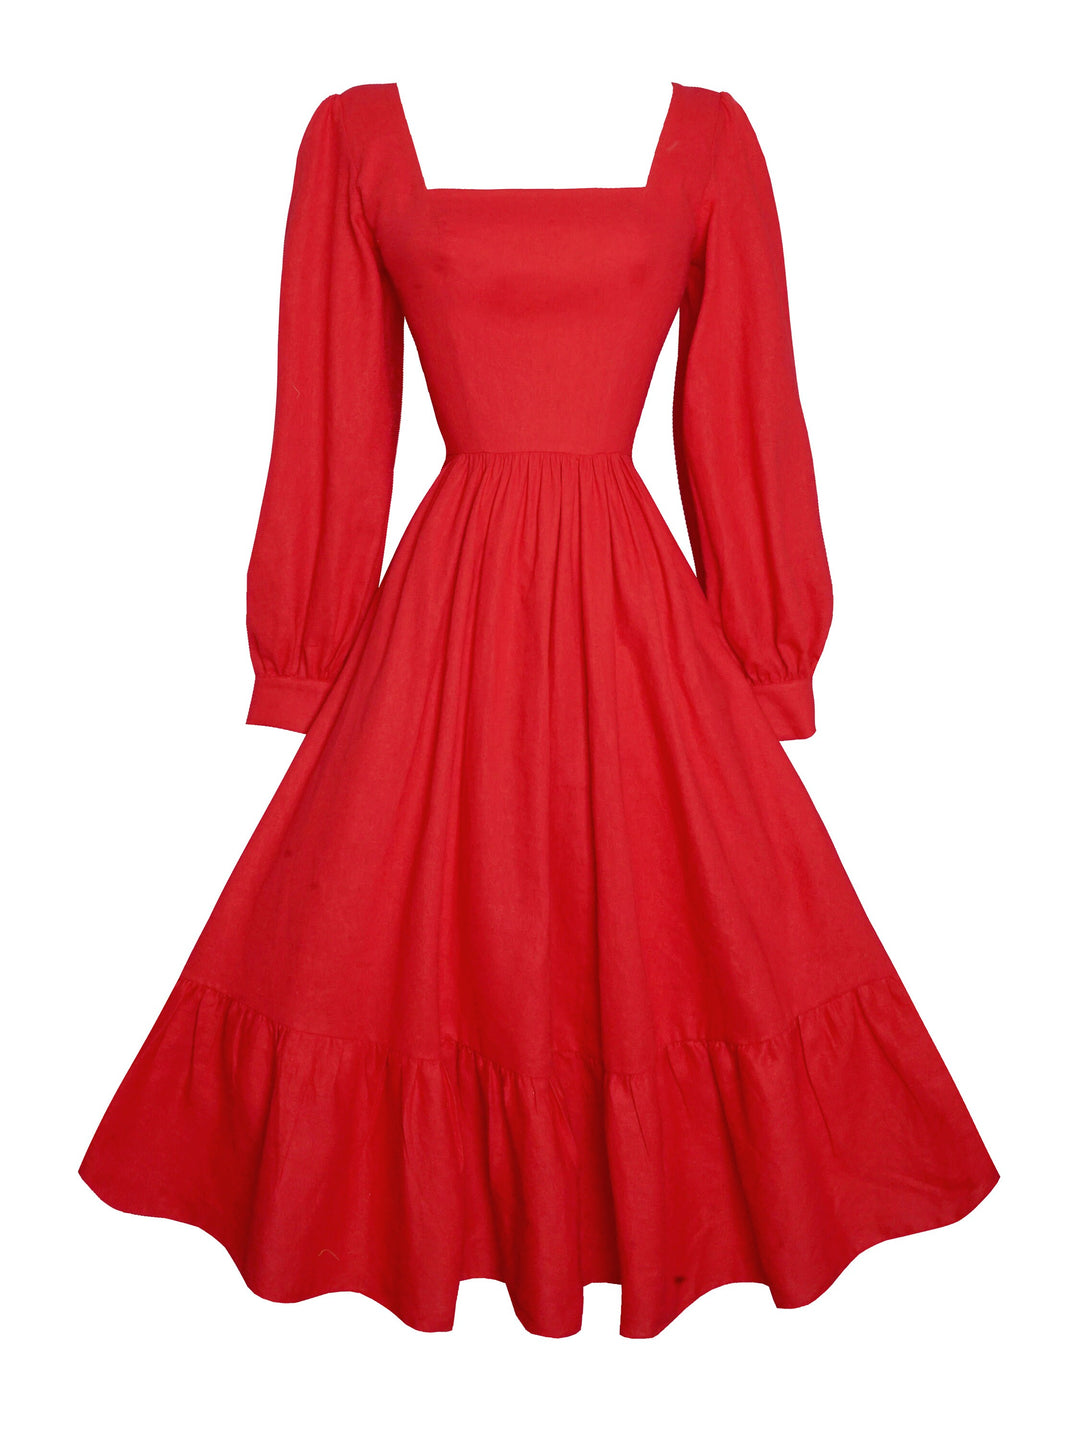 MTO - Mary Dress in Chili Red Linen